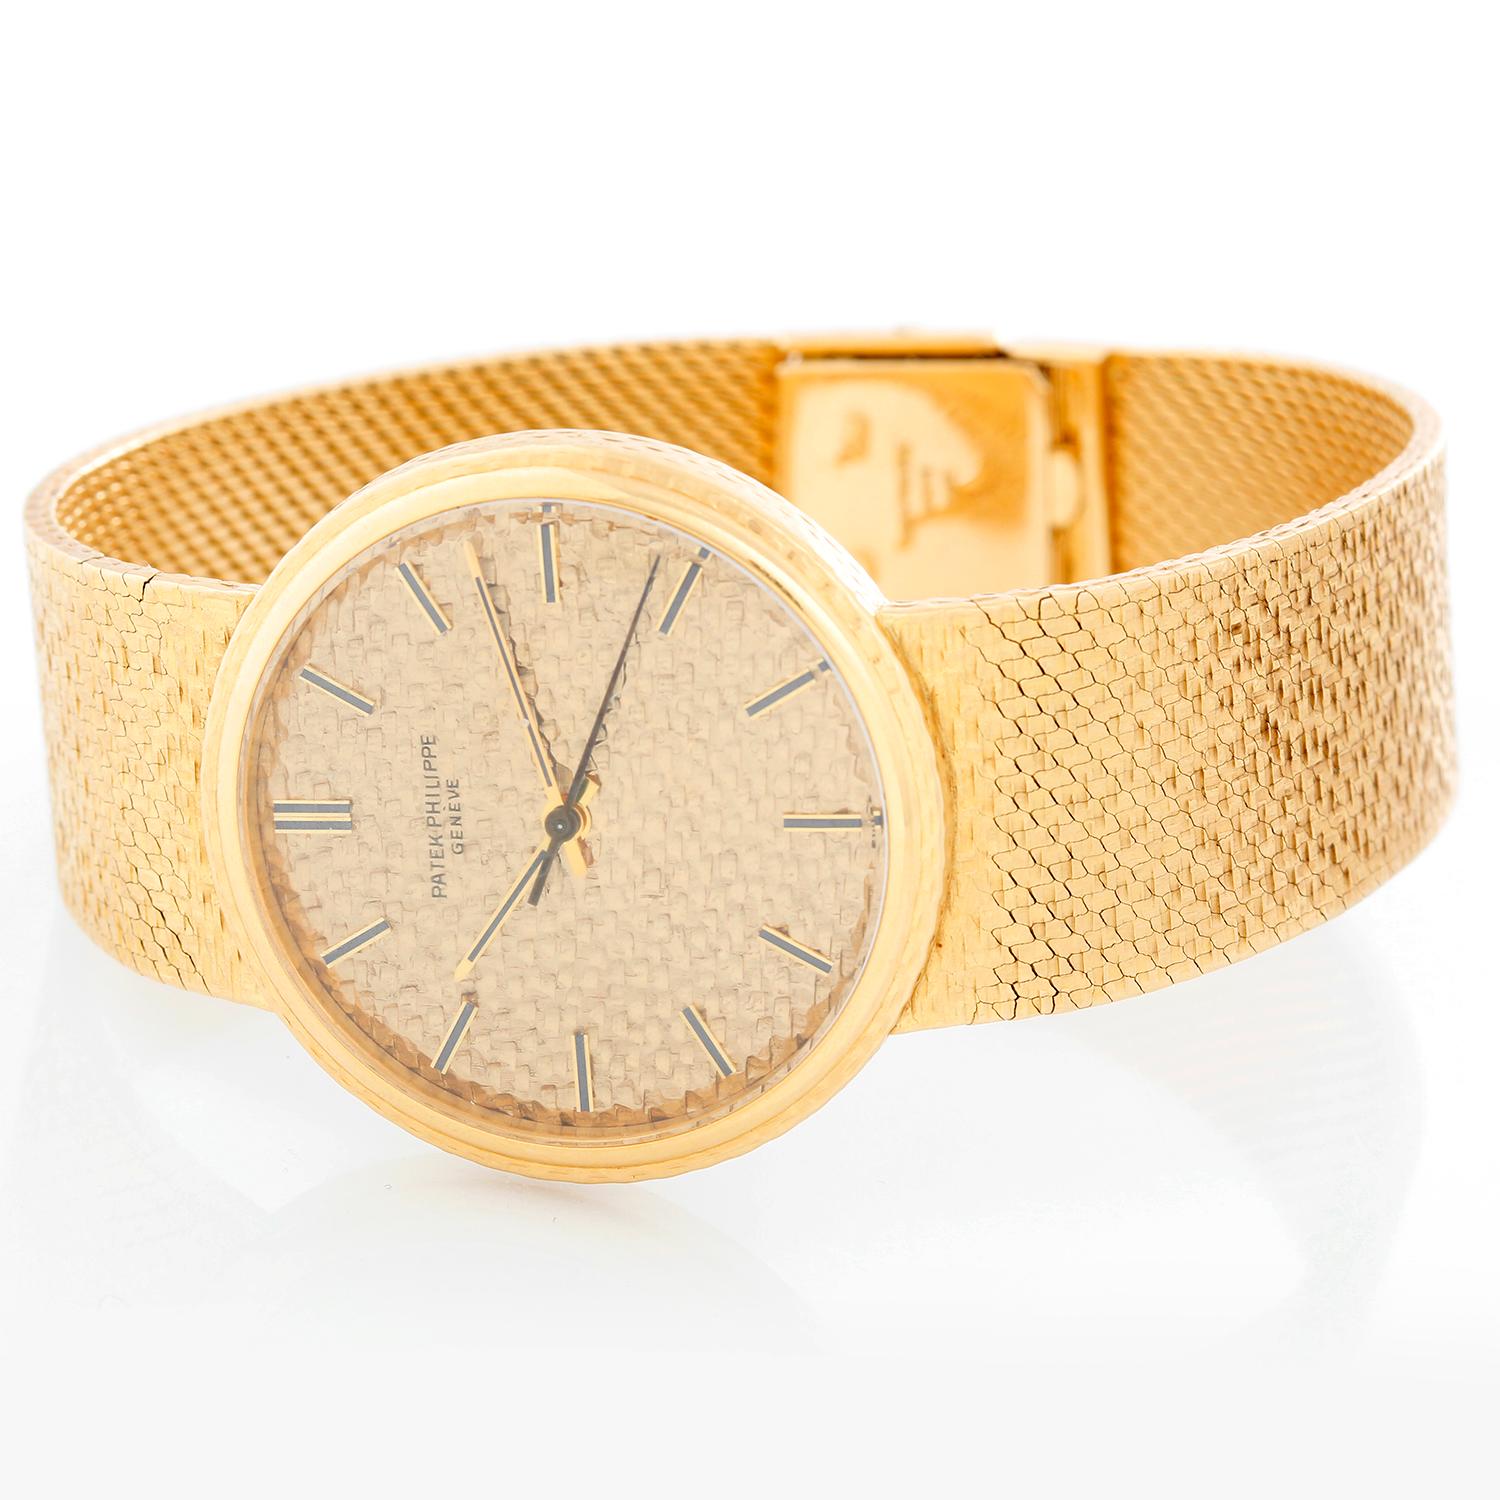 Patek Philippe & Co. 18K Yellow Gold Calatrava 3563 / 002 J - Manual. 18K Yellow Gold textured with smooth bezel ( 34 mm). Gold textured dial with yellow gold hour markers. 19K Yellow Gold Patek Philippe bracelet; will fit up to a 7 3/4 inch wrist .